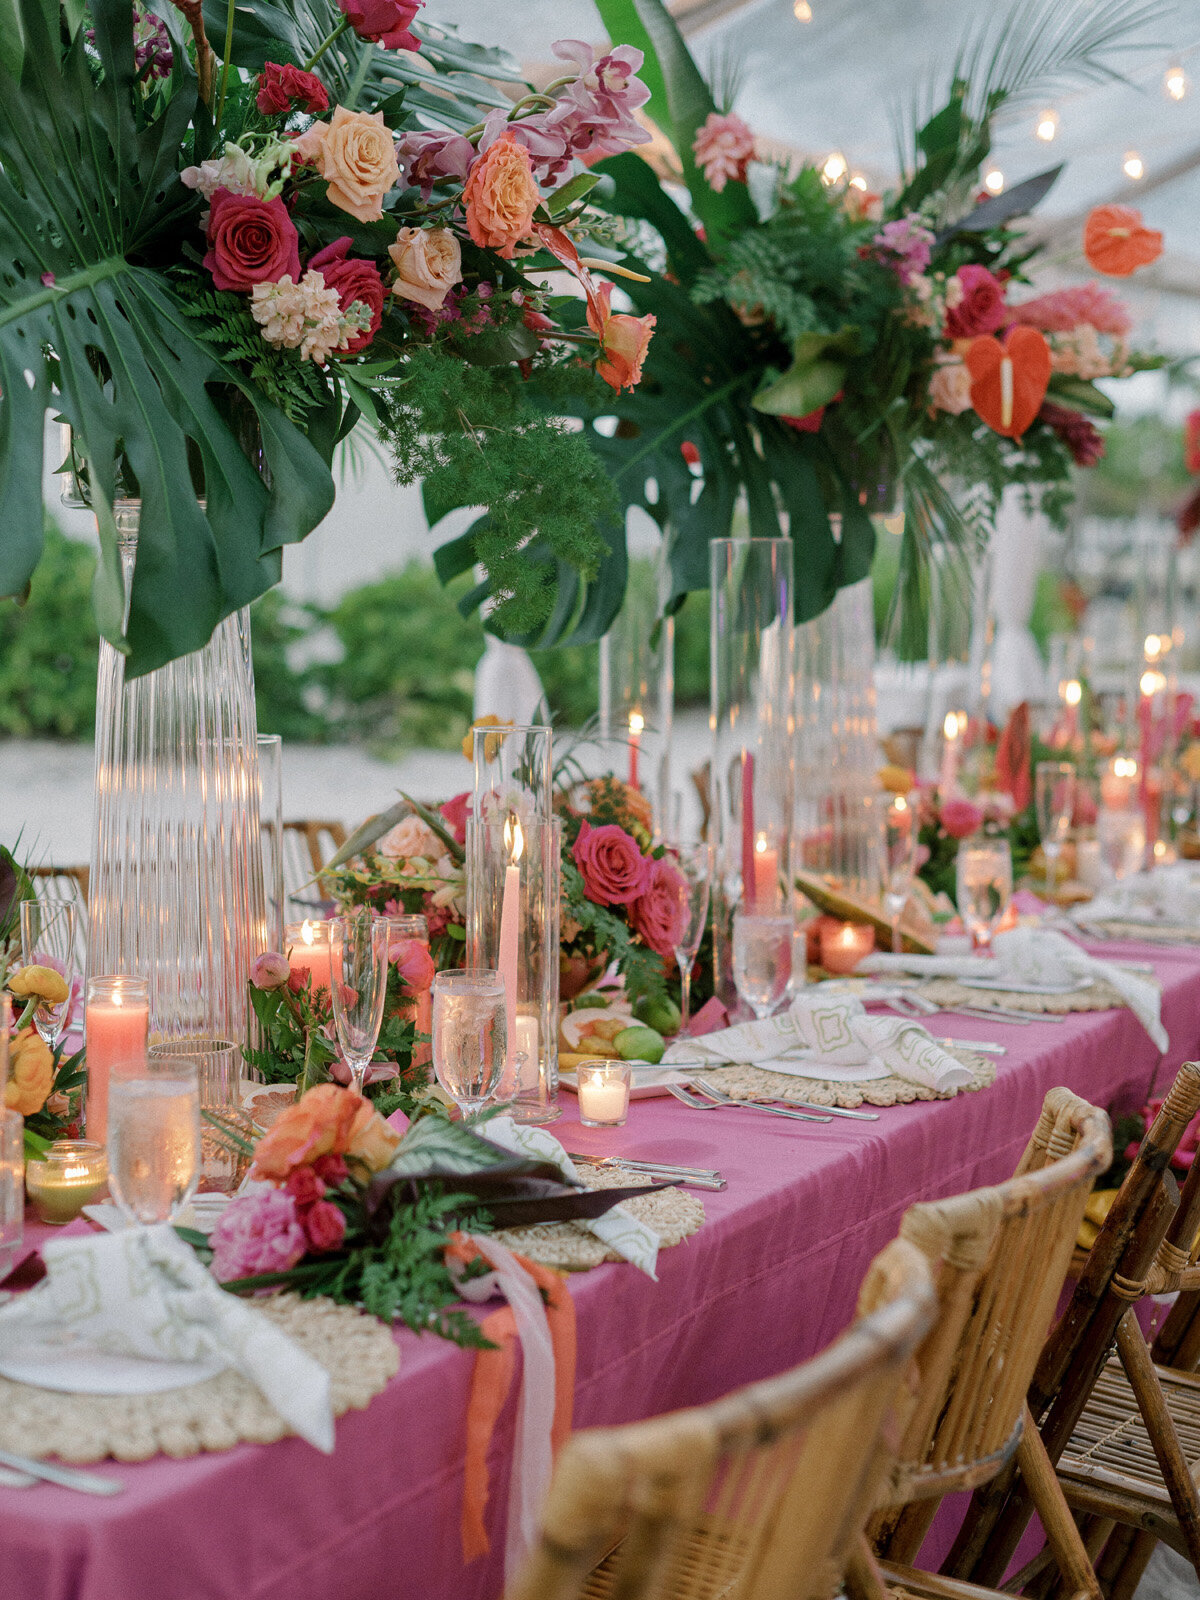 Kate-Murtaugh-Events-destination-wedding-planner-tropical-tented-reception-candlelight-dinner